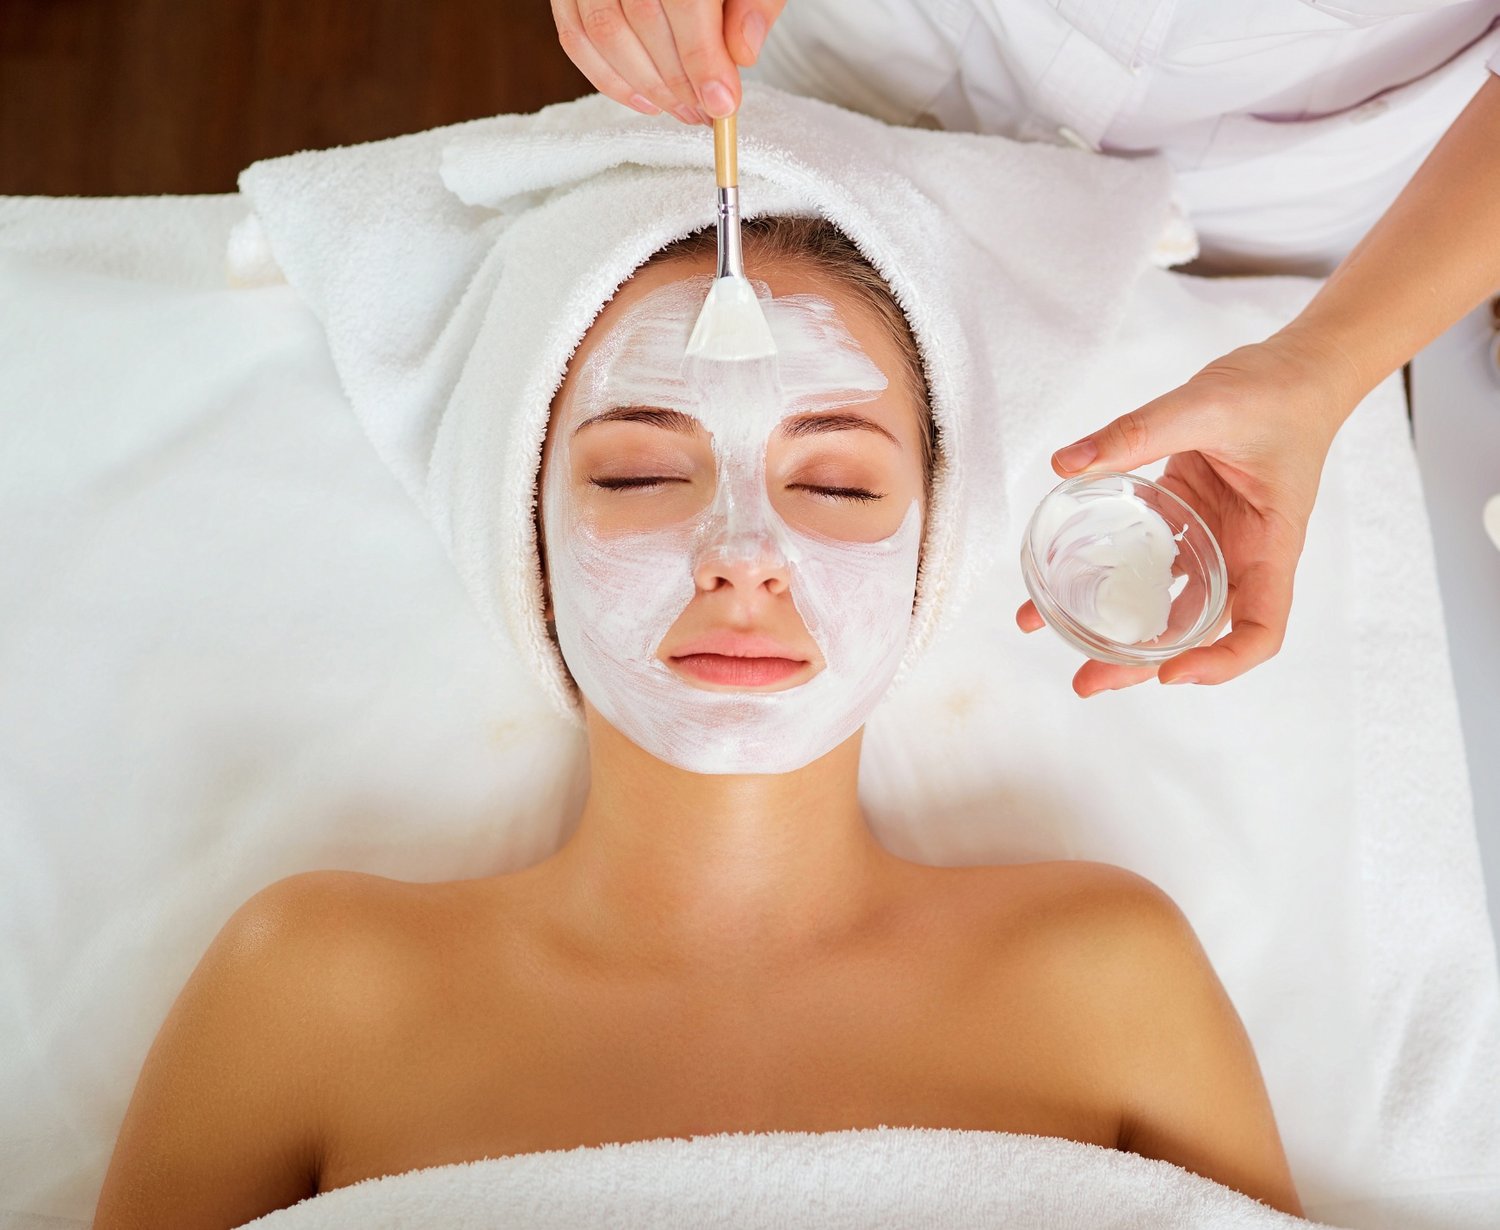 Discover Professional Skin Care: What You Need to Know